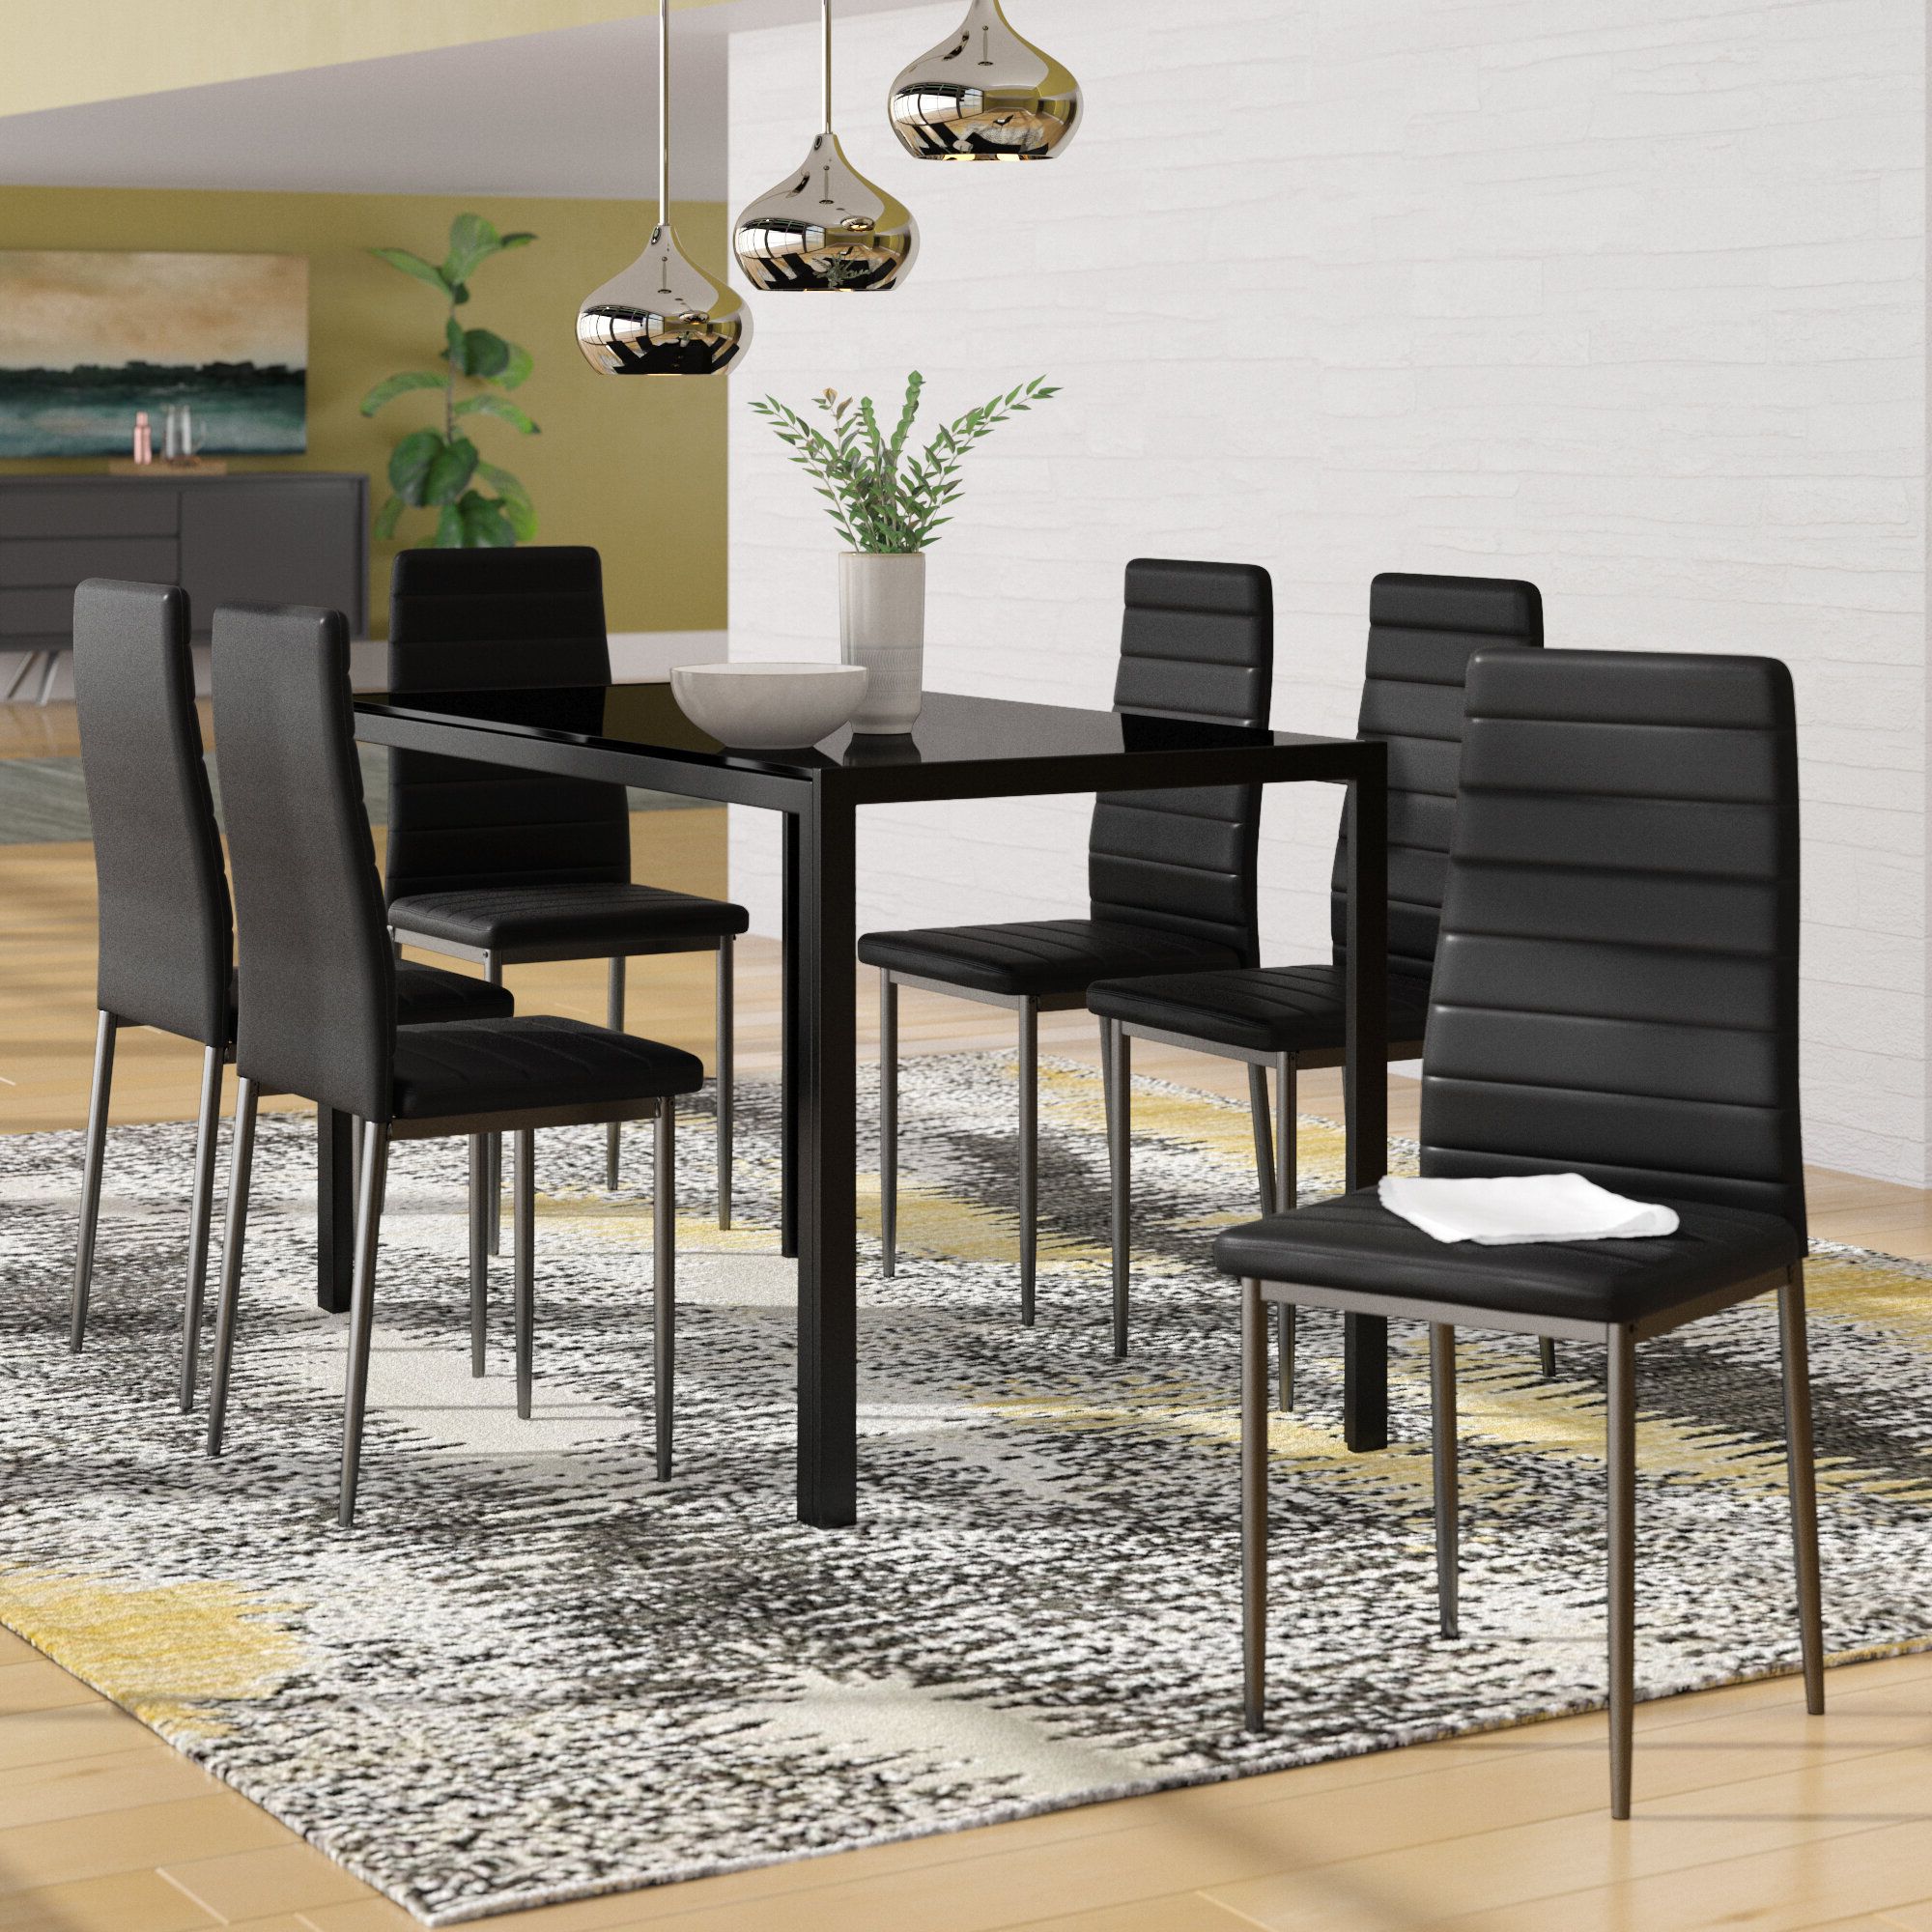 Haris 6 Piece Breakfast Nook Dining Set Within Most Recent Linette 5 Piece Dining Table Sets (View 11 of 20)